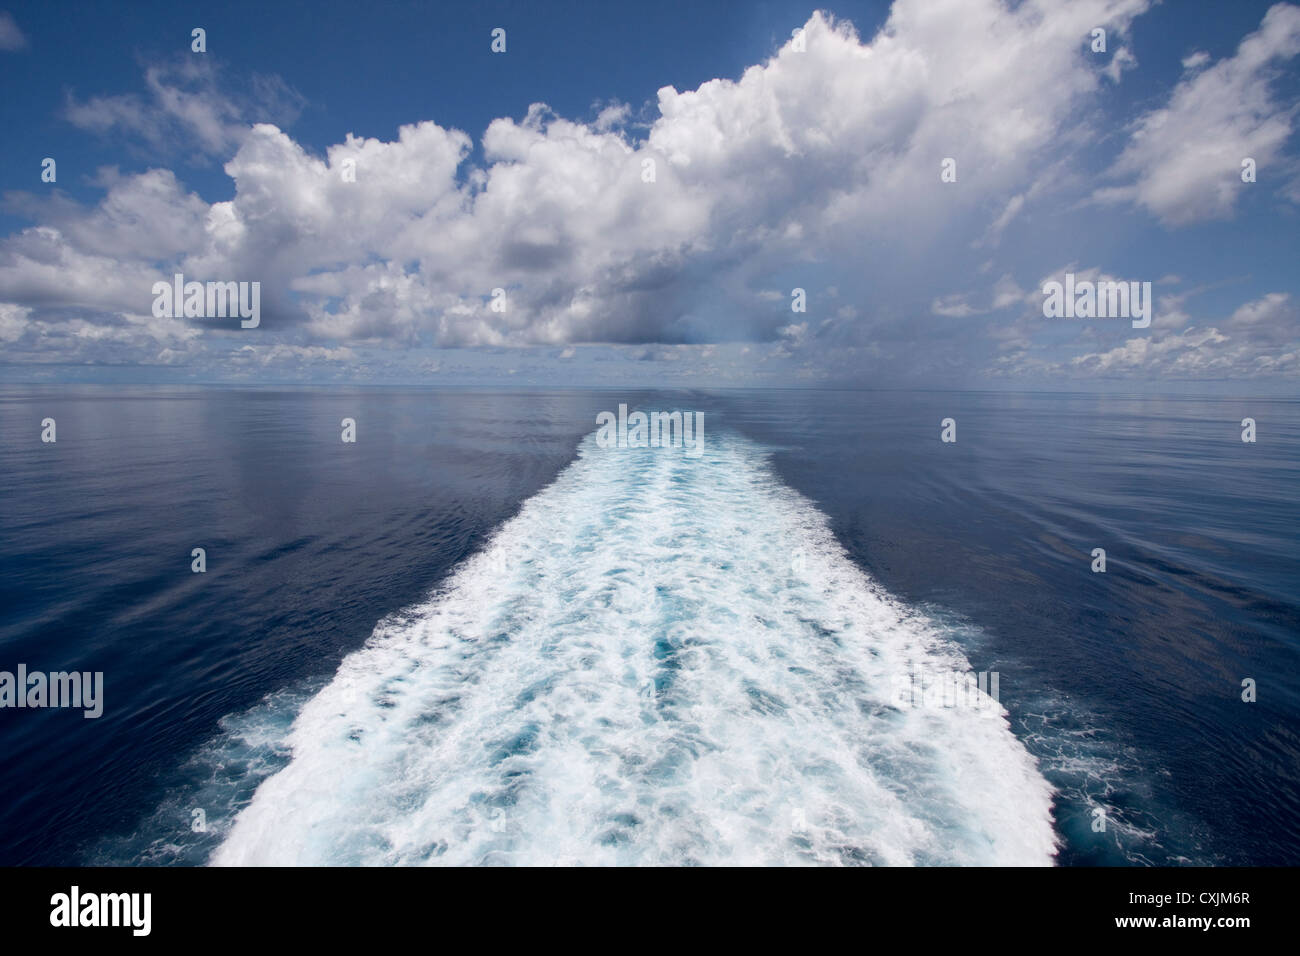 A perfect day sailing calm seas through the Indian Ocean off the coast of Indonesia. Stock Photo